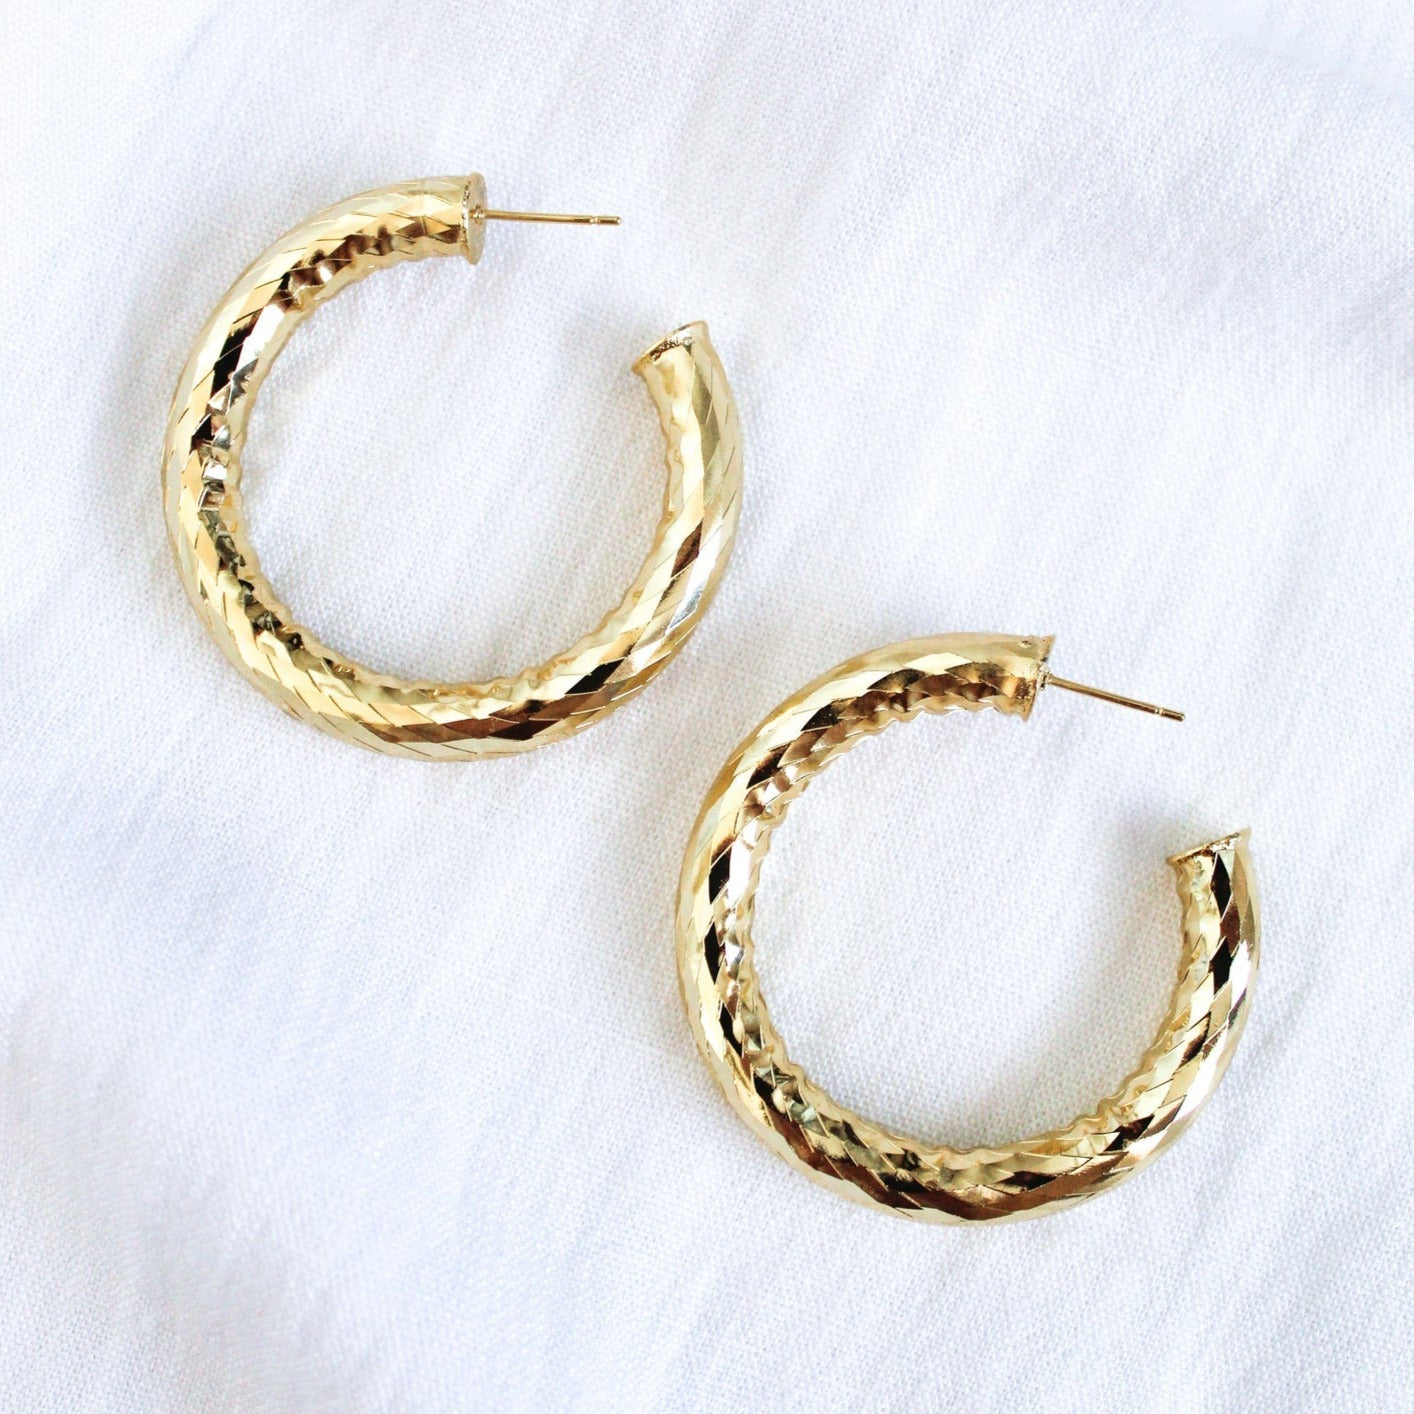 Kinsey Designs | Jasmine Small Hoop Earrings - Giddy Up Glamour Boutique